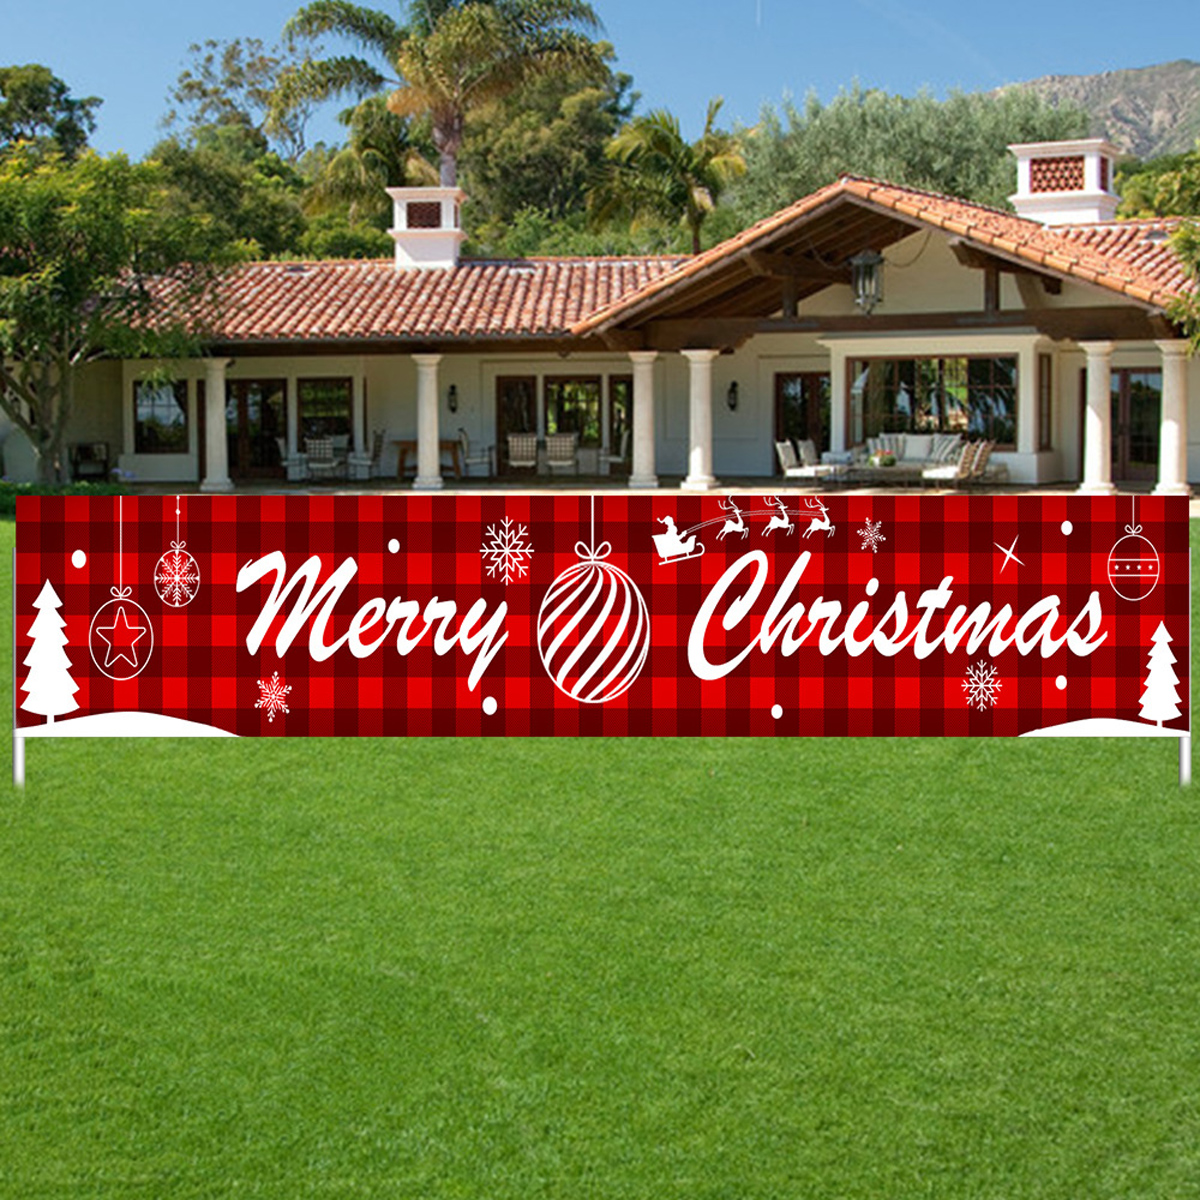 3M-Merry-Christmas-Outdoor-Banner-Oxford-Large-Hanging-Bunting-Xmas-Door-Wall-Decoration-Photography-1764541-5